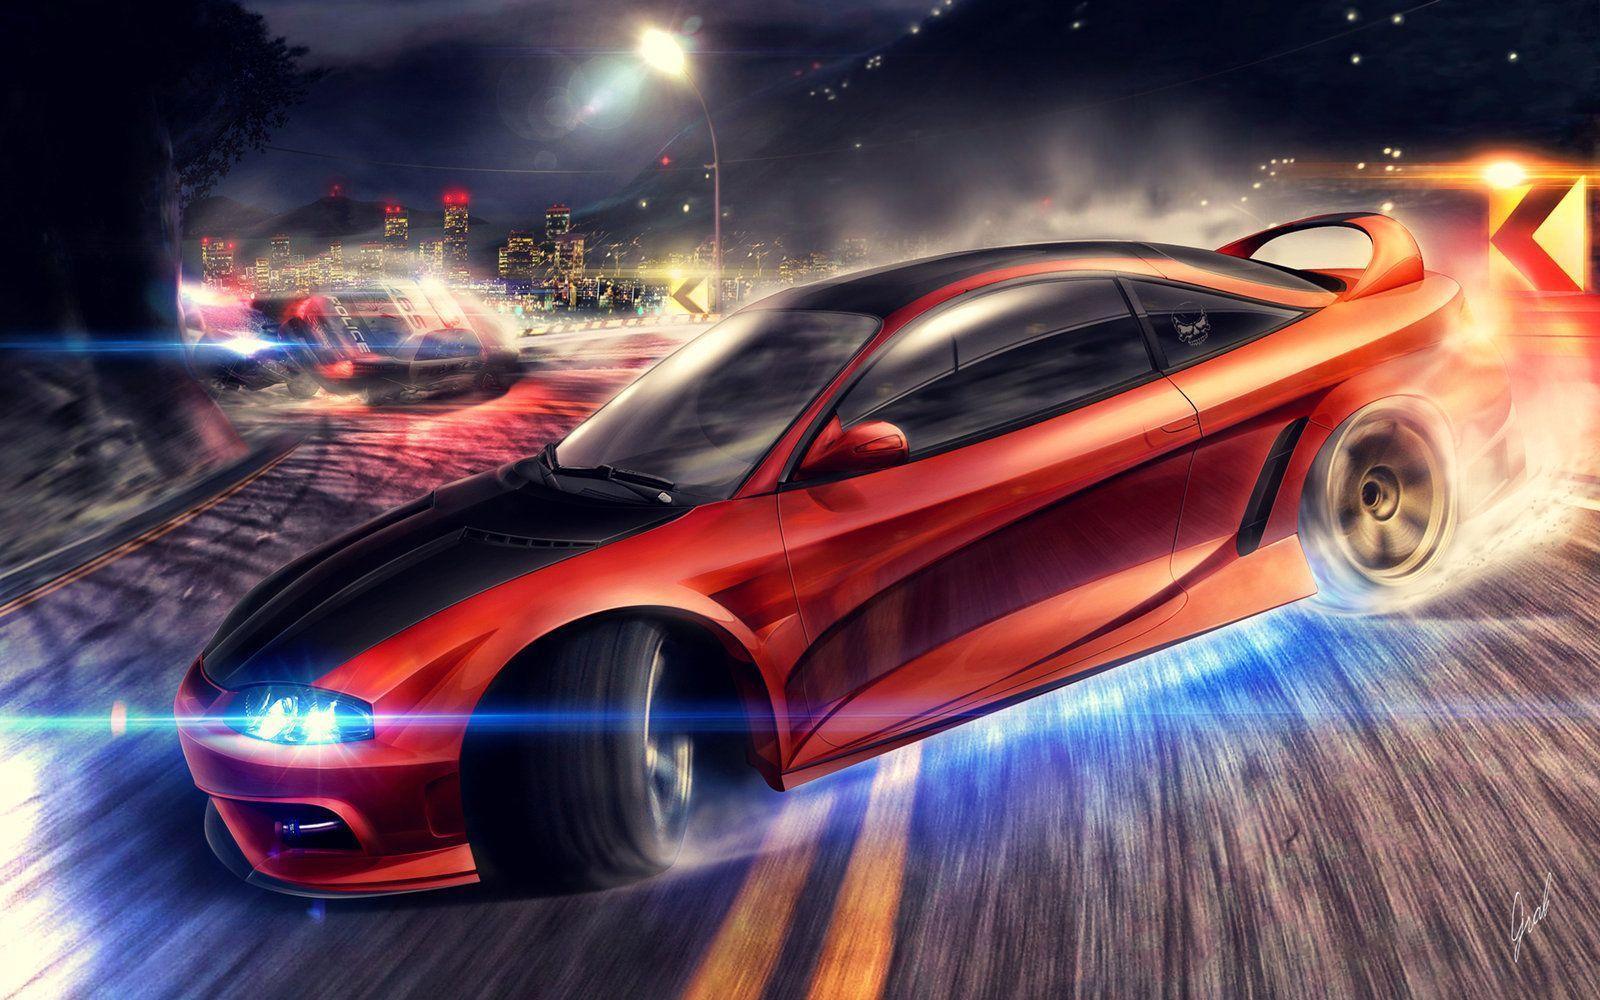 Need For Speed Most Wanted Mitsubishi Eclipse load screen